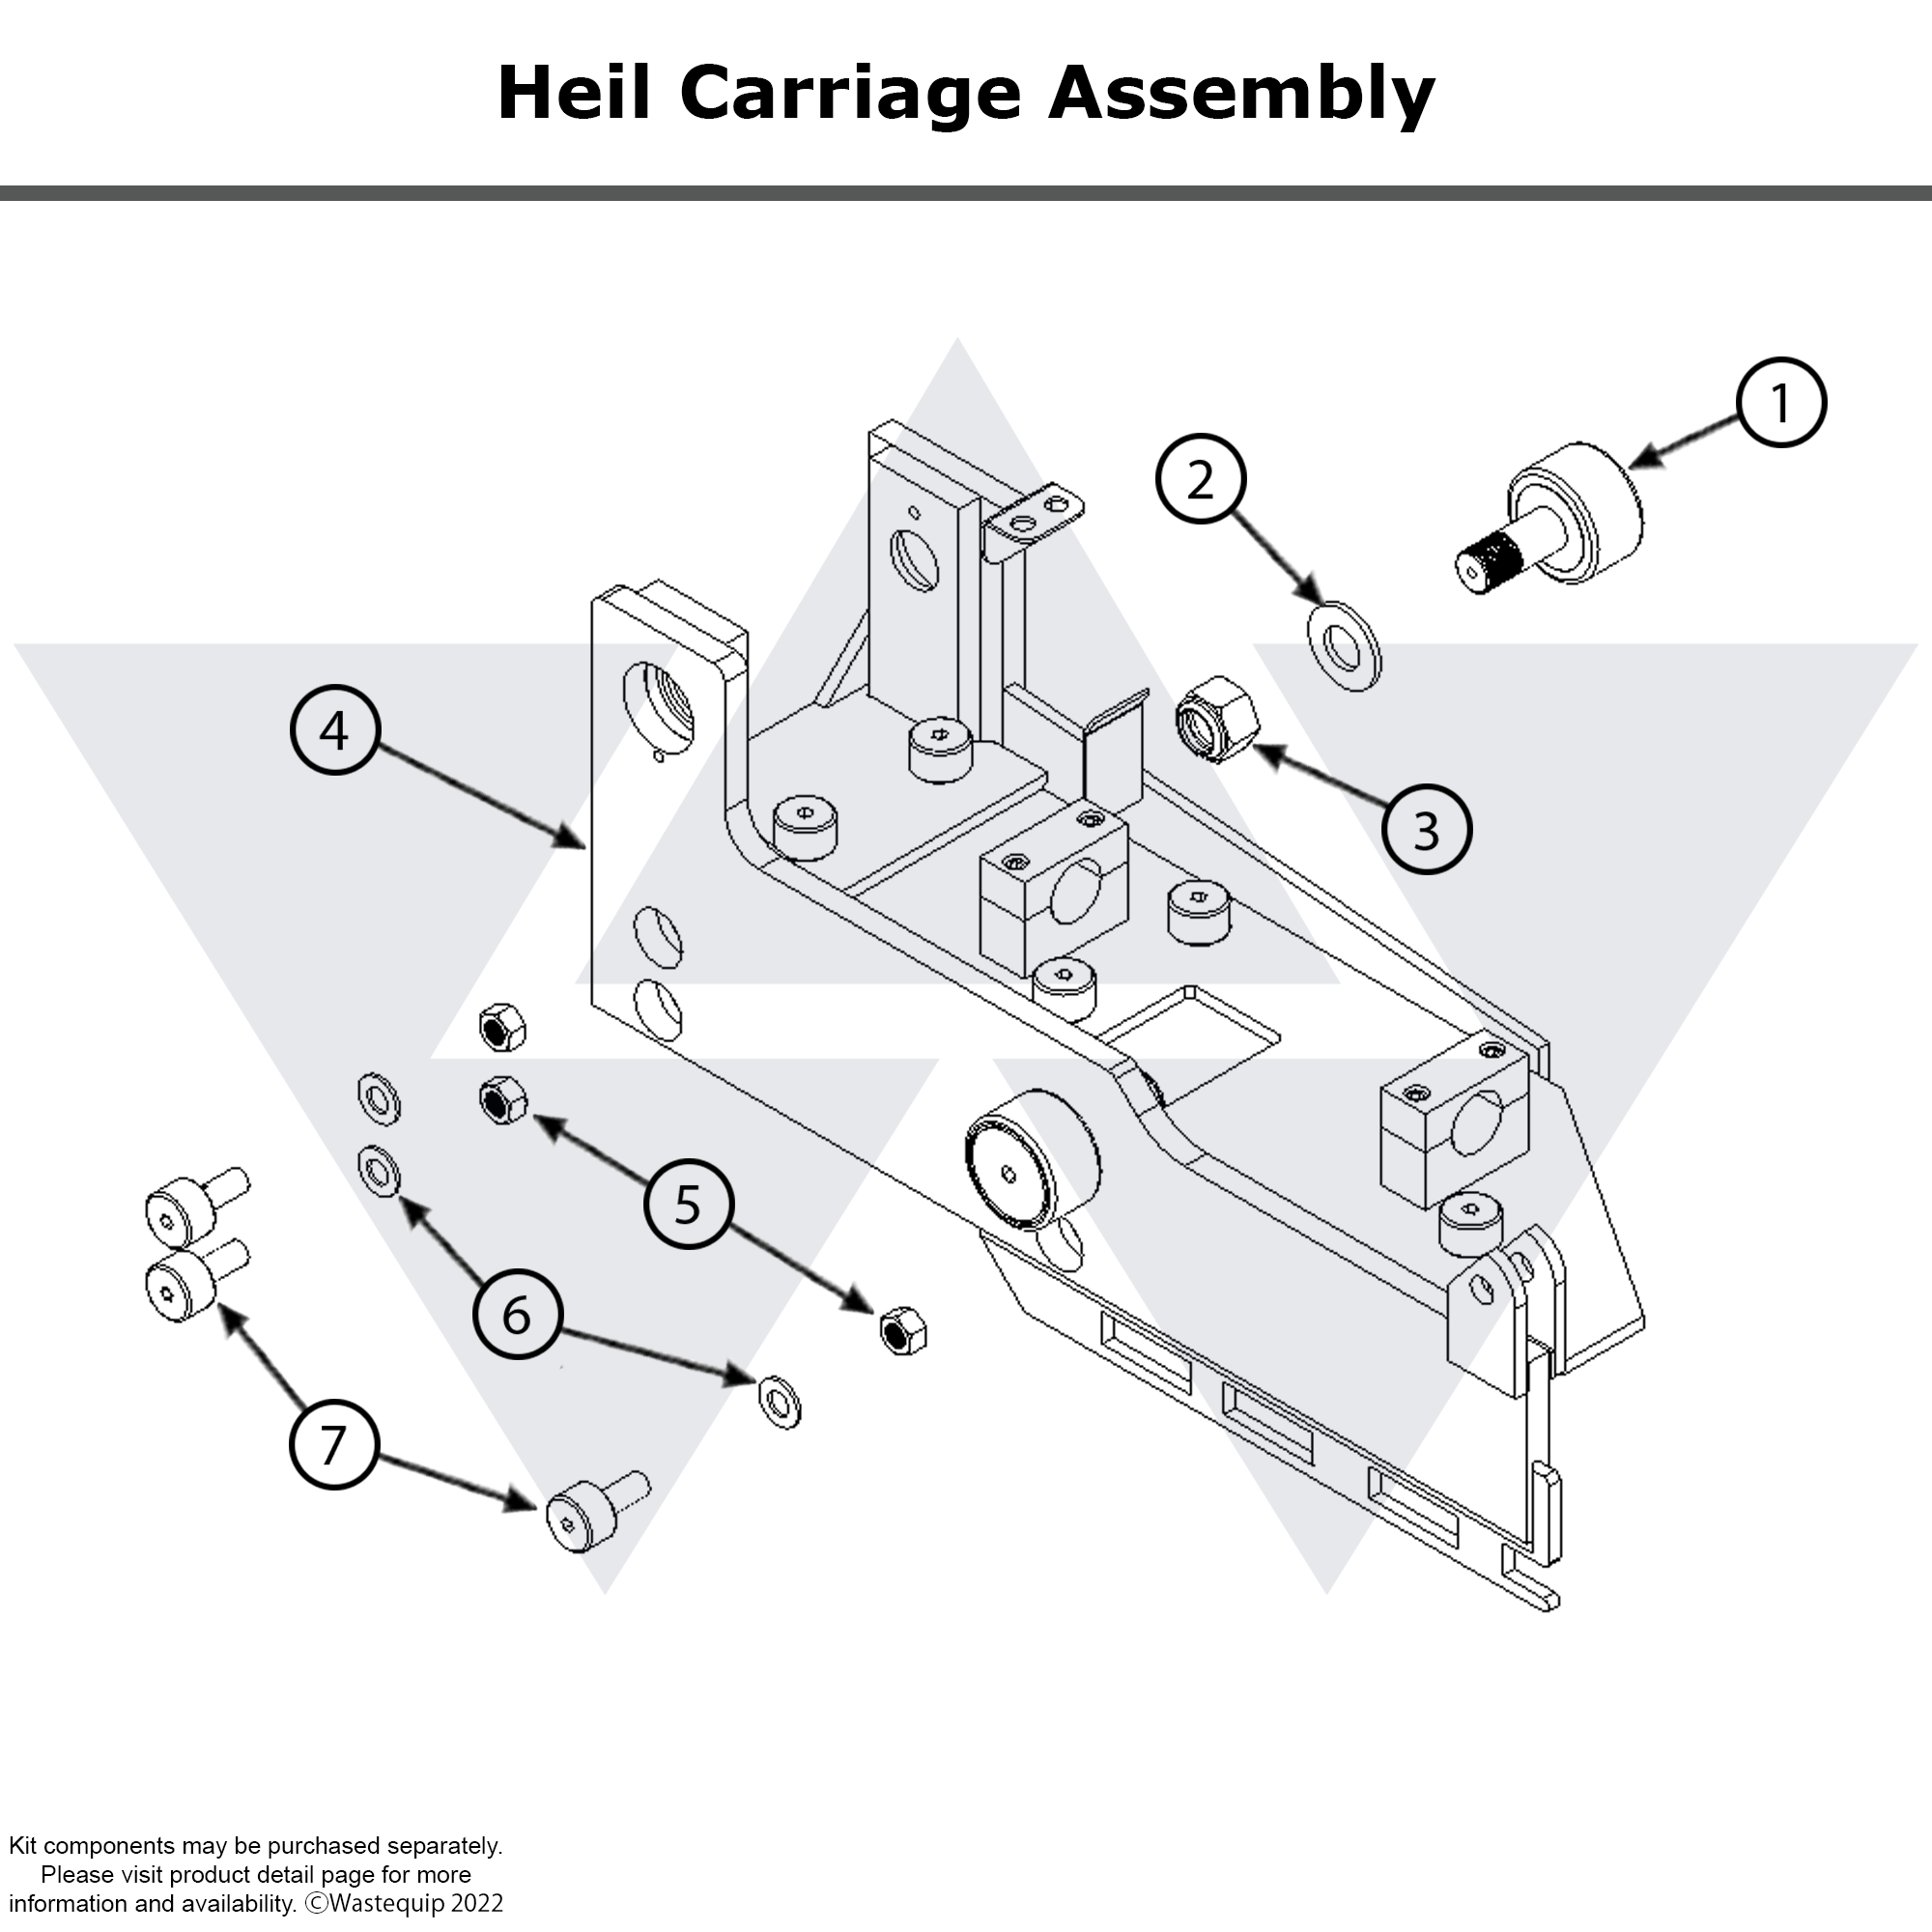 Wastebuilt® Replacement for Heil Carriage Assembly